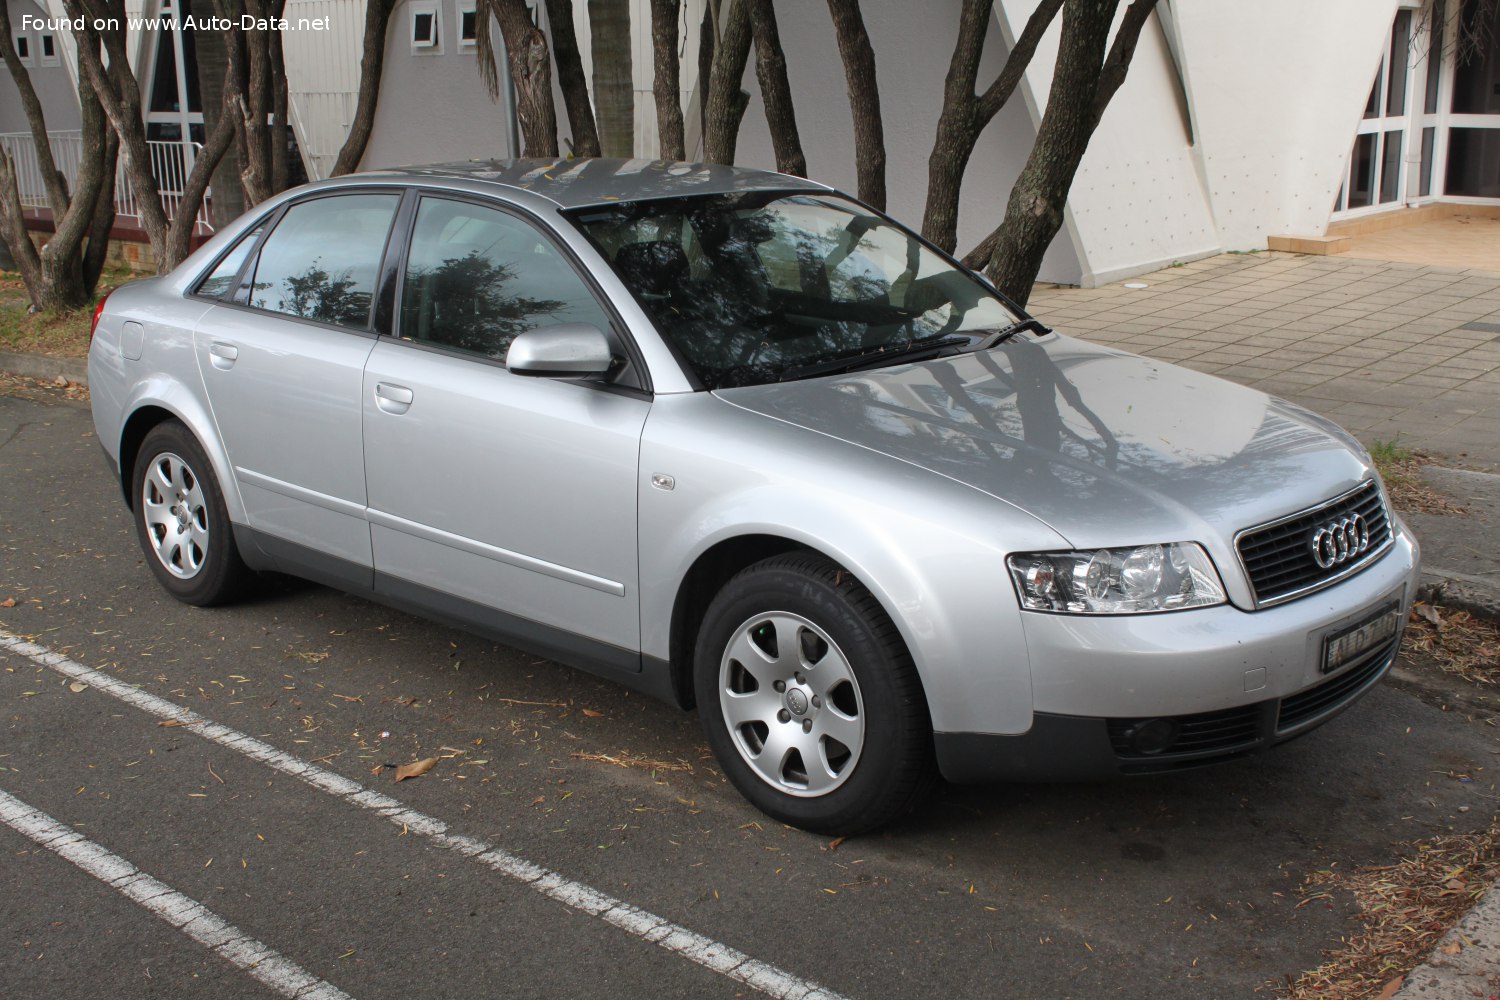 Audi A4 Avant (8D,B5) technical specifications and fuel consumption —